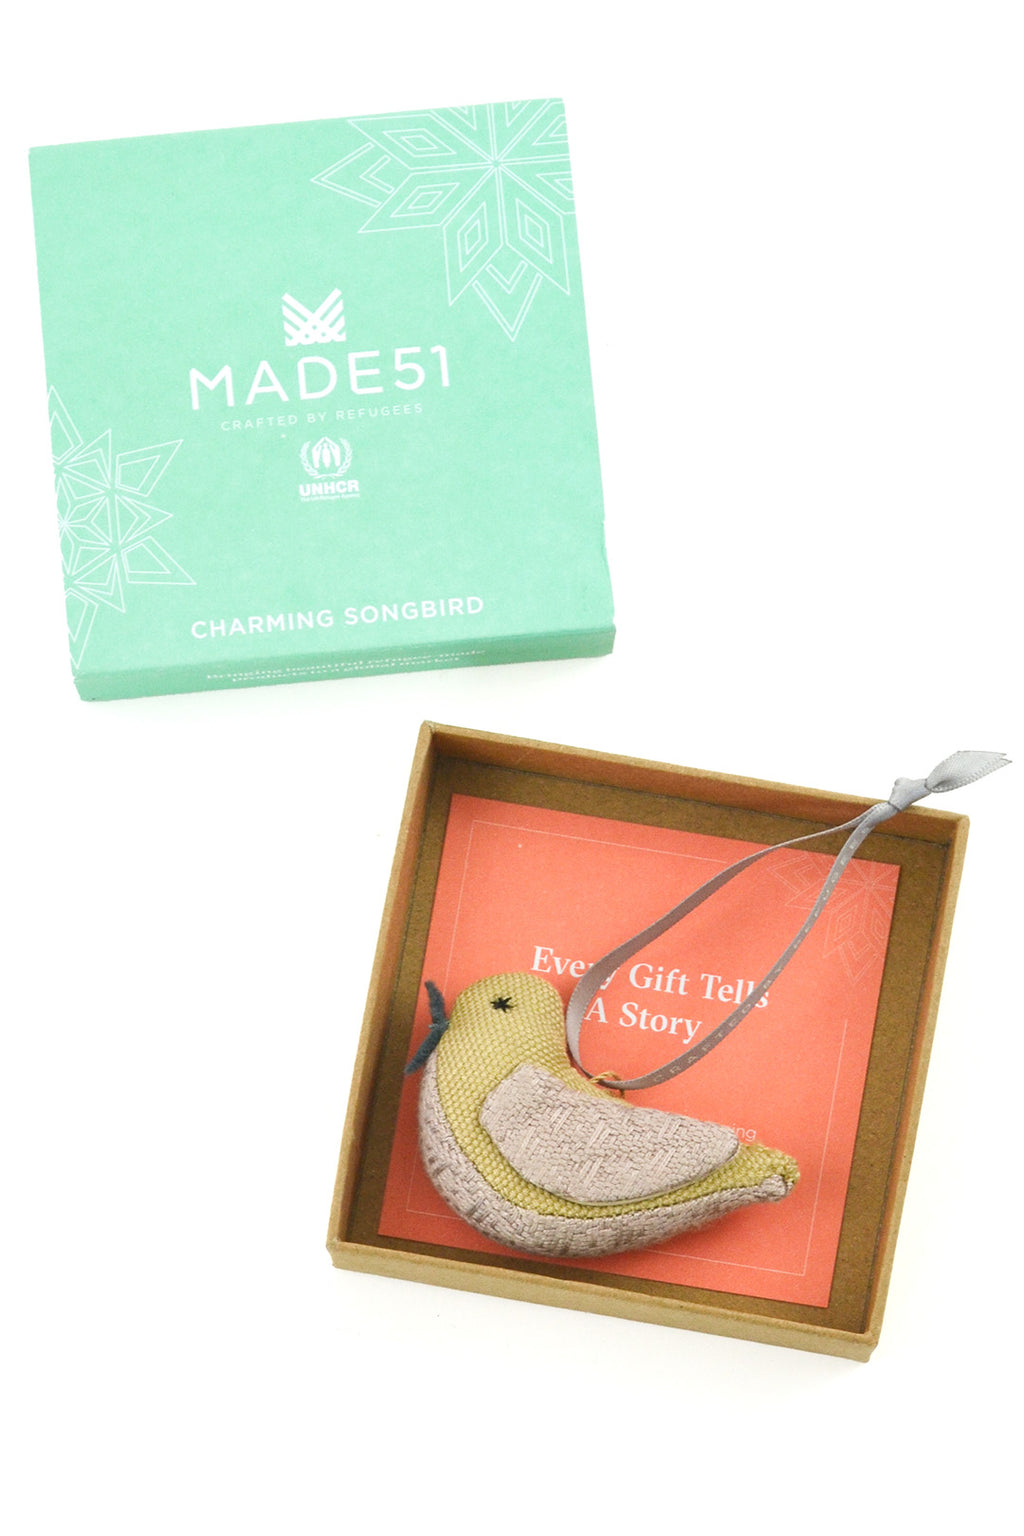 MADE51 Charming Songbird Ornament, Made by Karenni Refugees Living in Thailand